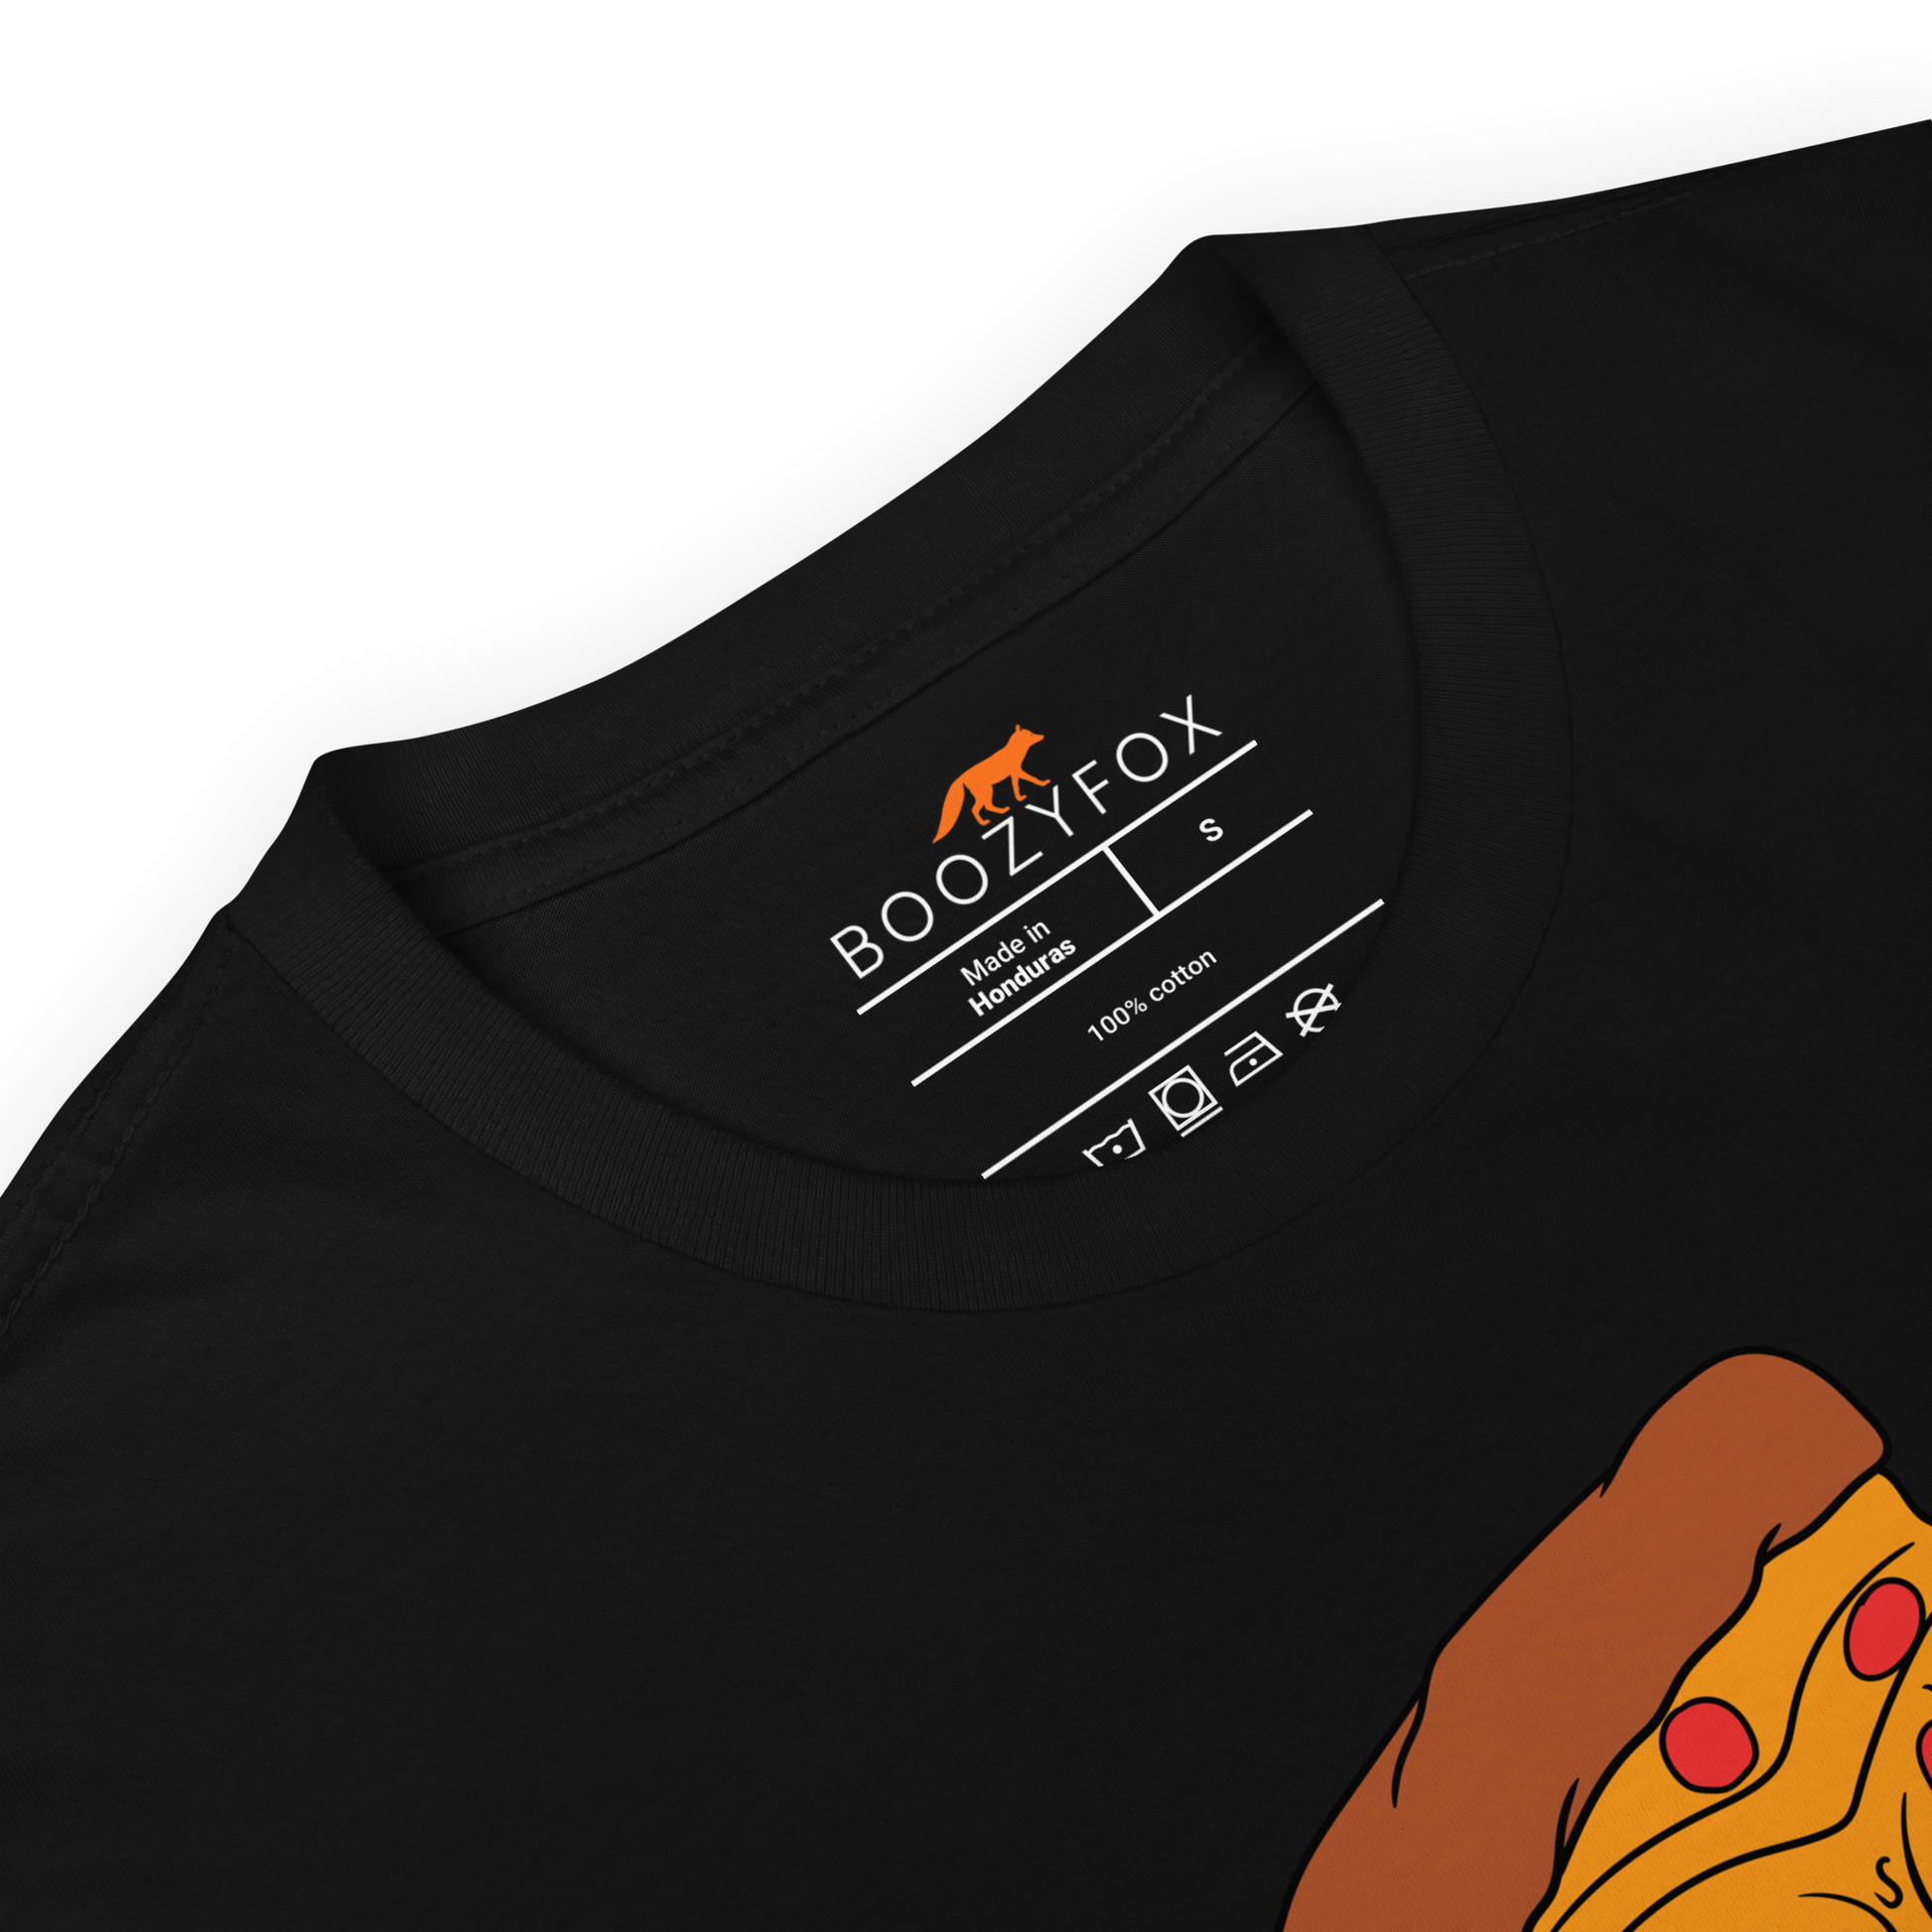 Product details of a Black Melting Pizza T-Shirt featuring the hilarious Meltdown Madness graphic on the chest - Funny Graphic Pizza T-Shirts - Boozy Fox